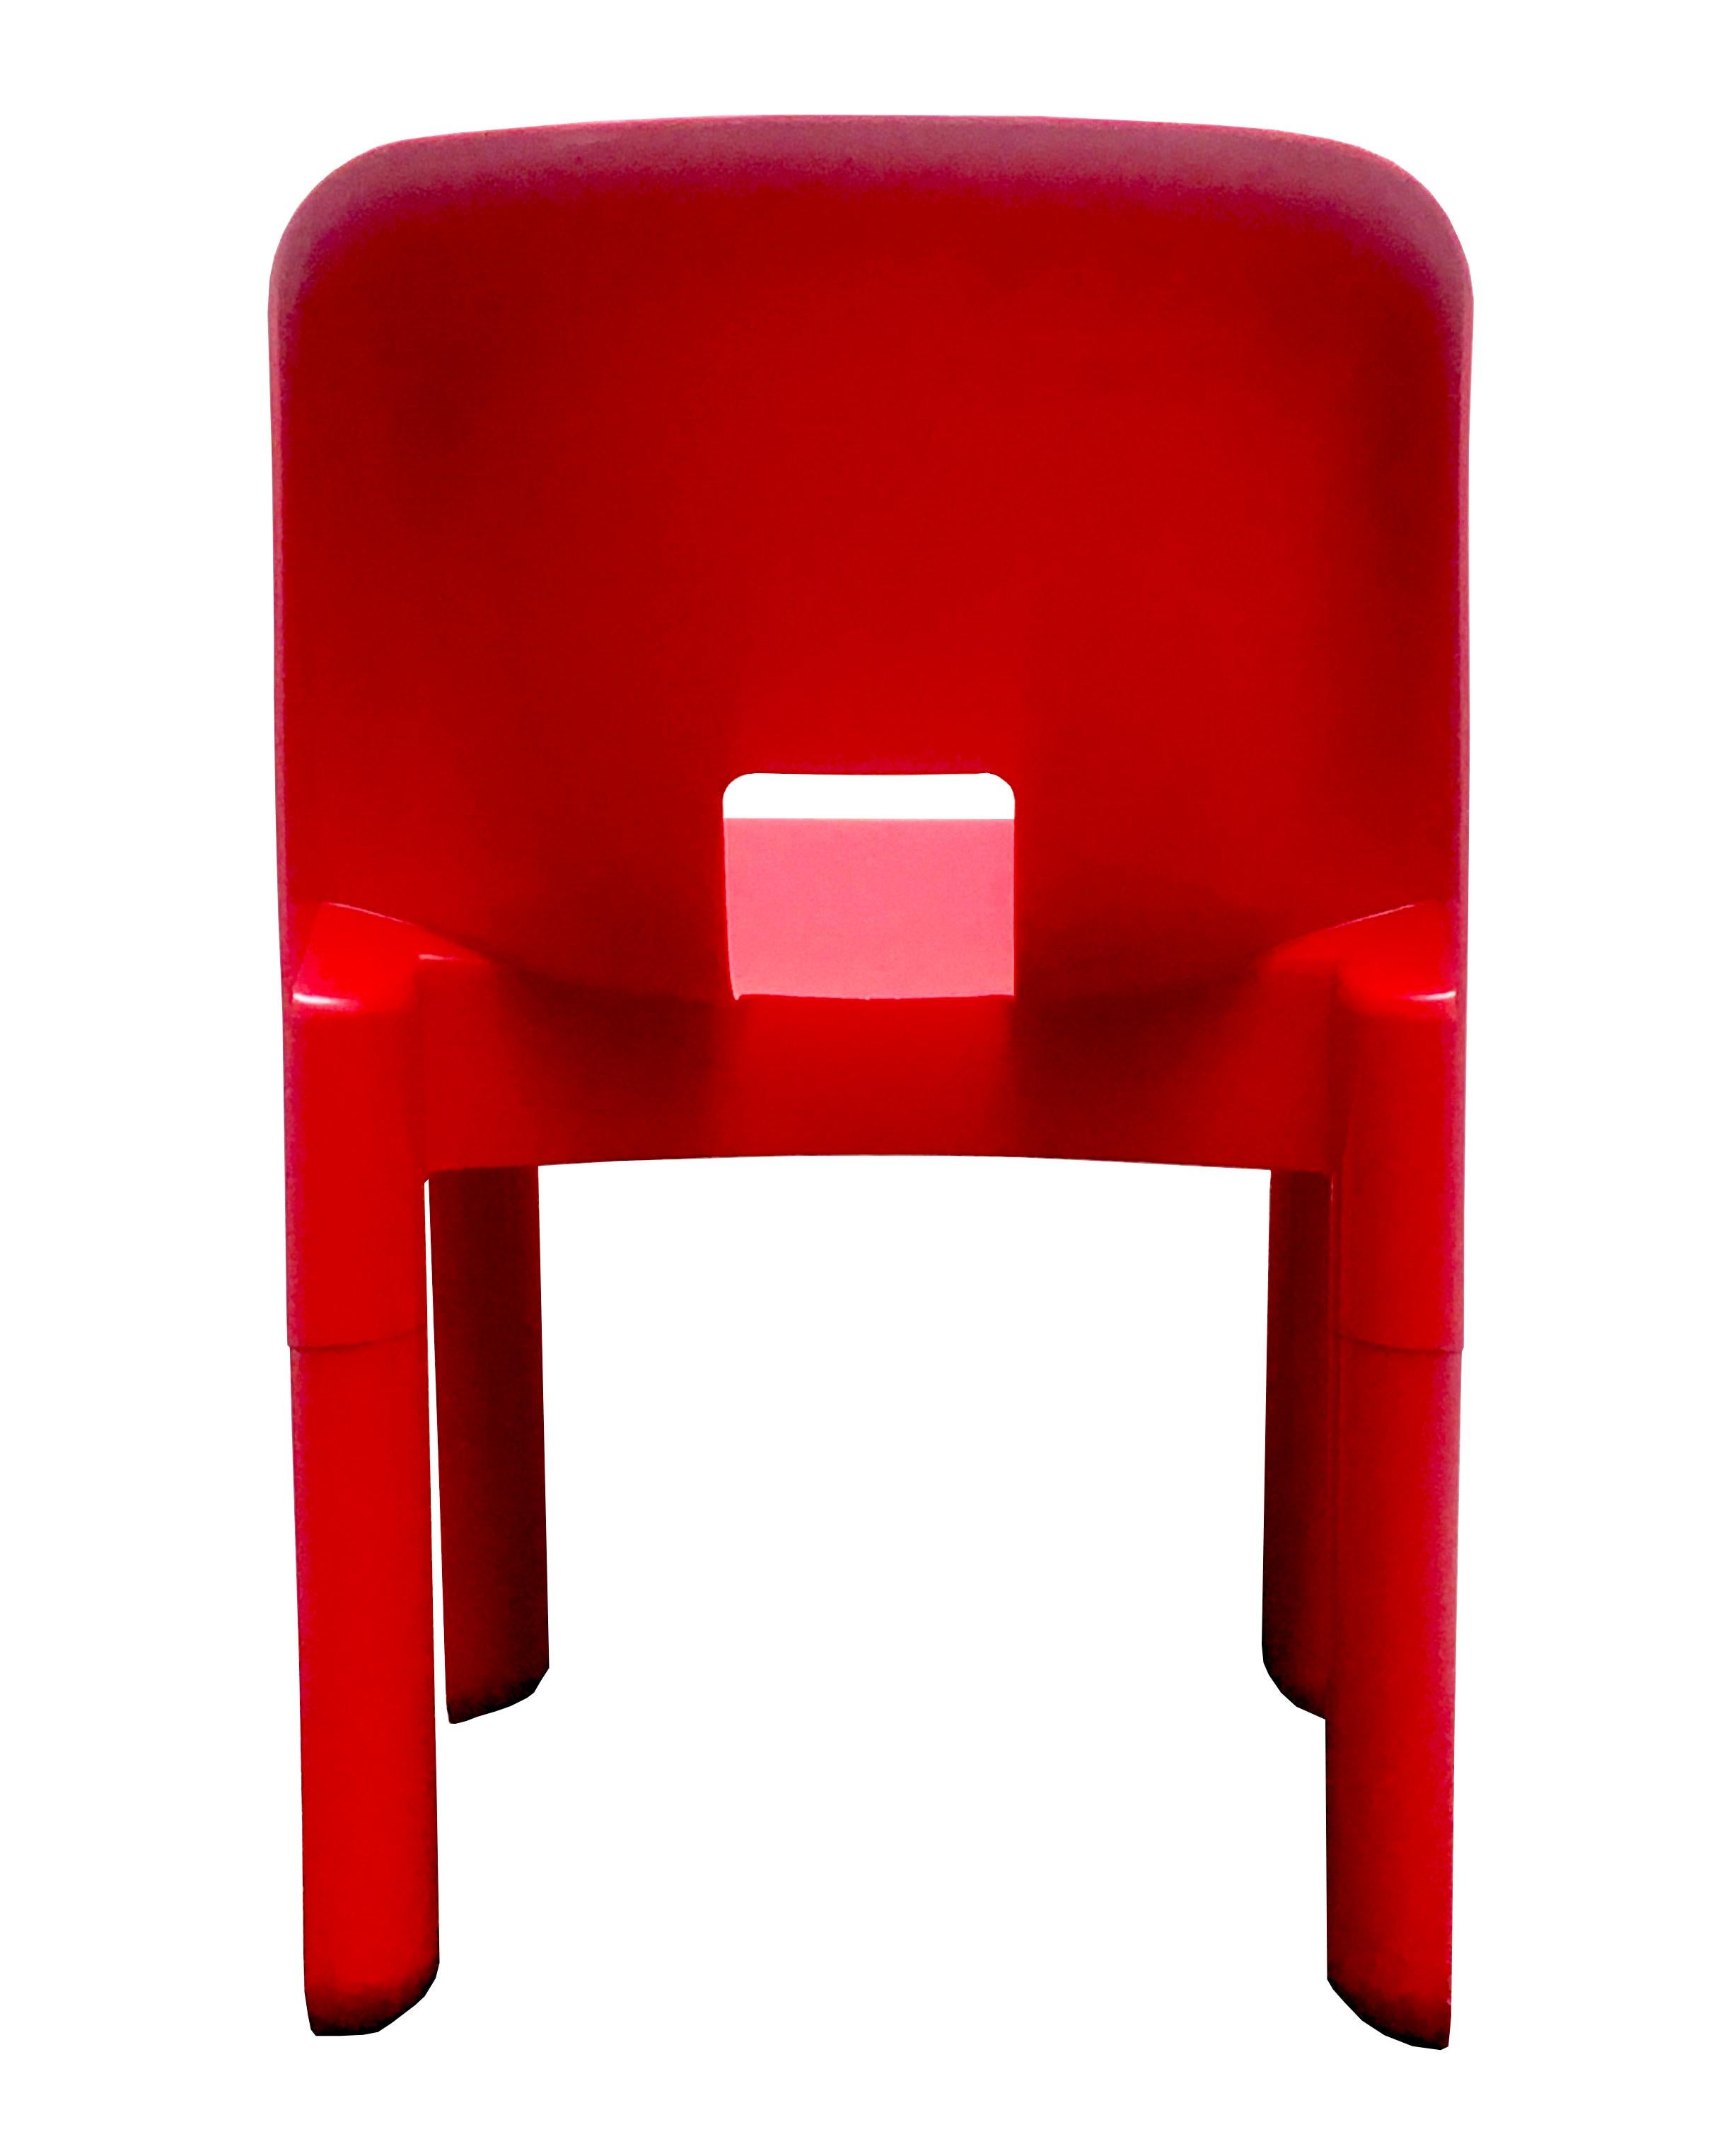 rubber chair